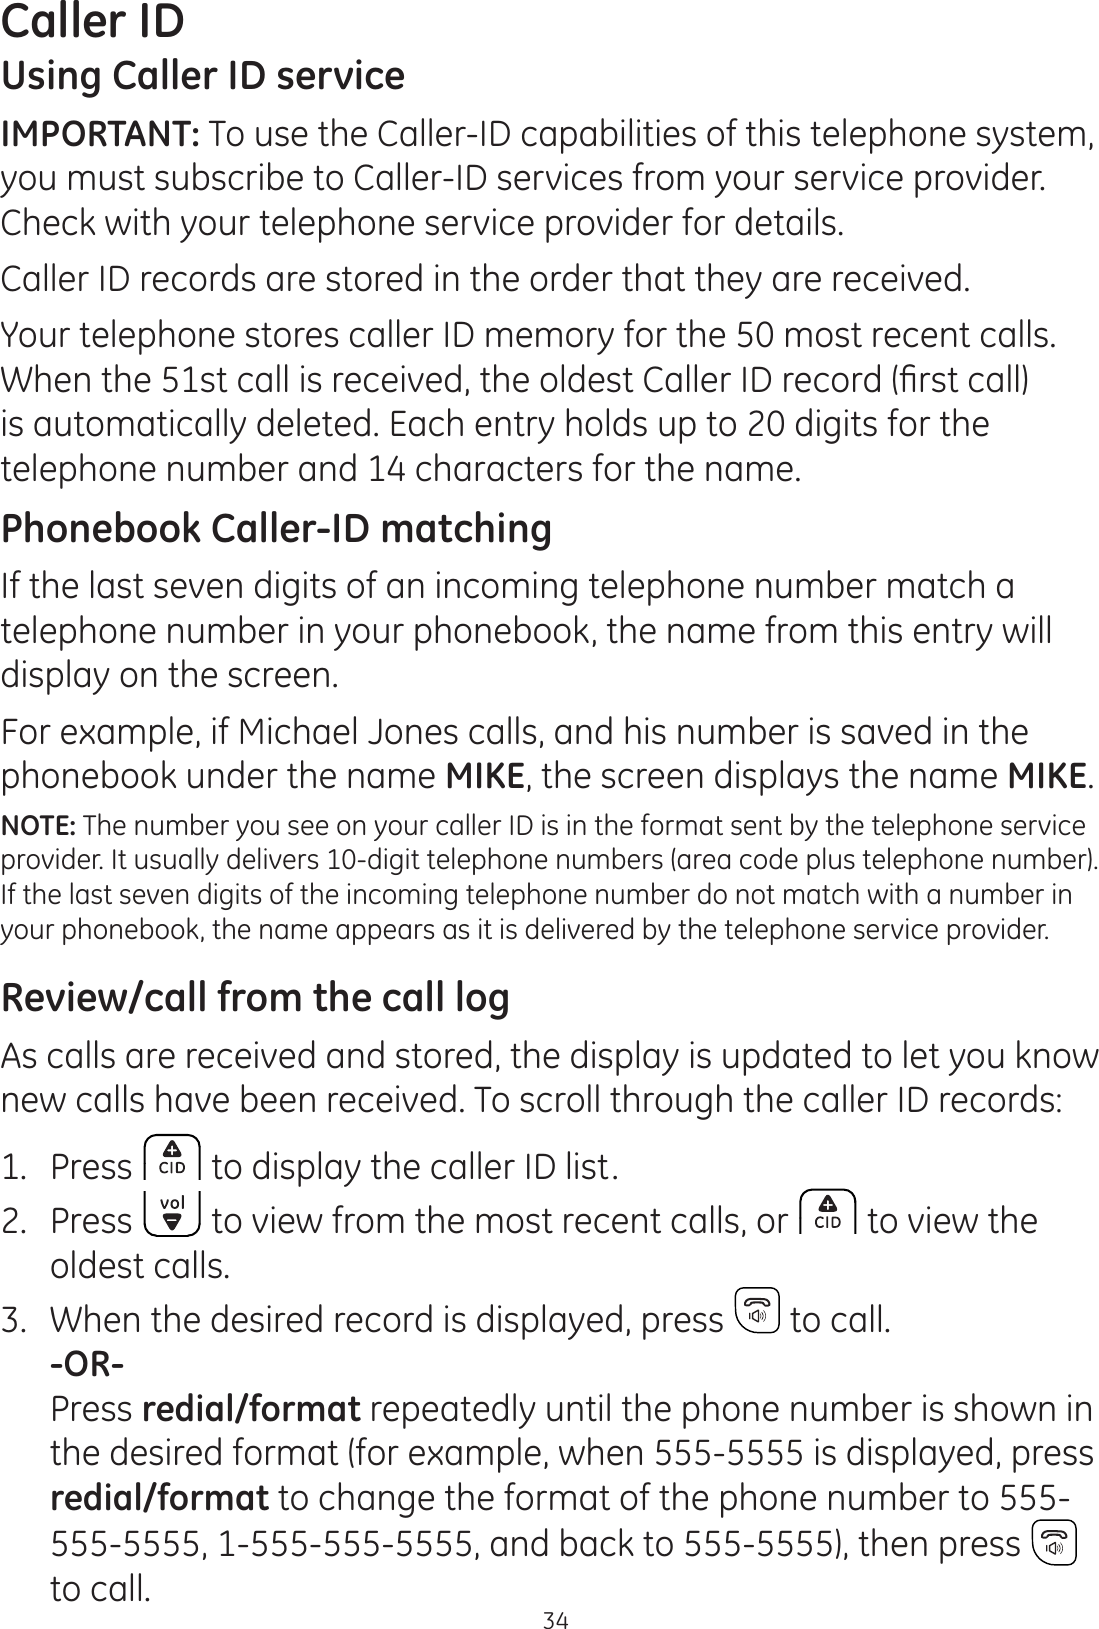 34Caller IDUsing Caller ID serviceIMPORTANT: To use the Caller-ID capabilities of this telephone system, you must subscribe to Caller-ID services from your service provider.  Check with your telephone service provider for details.Caller ID records are stored in the order that they are received.Your telephone stores caller ID memory for the 50 most recent calls. :KHQWKHVWFDOOLVUHFHLYHGWKHROGHVW&amp;DOOHU,&apos;UHFRUG¿UVWFDOOis automatically deleted. Each entry holds up to 20 digits for the telephone number and 14 characters for the name.Phonebook Caller-ID matchingIf the last seven digits of an incoming telephone number match a telephone number in your phonebook, the name from this entry will display on the screen.For example, if Michael Jones calls, and his number is saved in the phonebook under the name MIKE, the screen displays the name MIKE.NOTE: The number you see on your caller ID is in the format sent by the telephone service provider. It usually delivers 10-digit telephone numbers (area code plus telephone number). If the last seven digits of the incoming telephone number do not match with a number in your phonebook, the name appears as it is delivered by the telephone service provider. Review/call from the call logAs calls are received and stored, the display is updated to let you know new calls have been received. To scroll through the caller ID records:1.  Press  to display the caller ID list.2.  Press   to view from the most recent calls, or   to view the  oldest calls.3.  When the desired record is displayed, press   to call. -OR-  Press redial/format repeatedly until the phone number is shown in the desired format (for example, when 555-5555 is displayed, press redial/format to change the format of the phone number to 555-555-5555, 1-555-555-5555, and back to 555-5555), then press   to call.